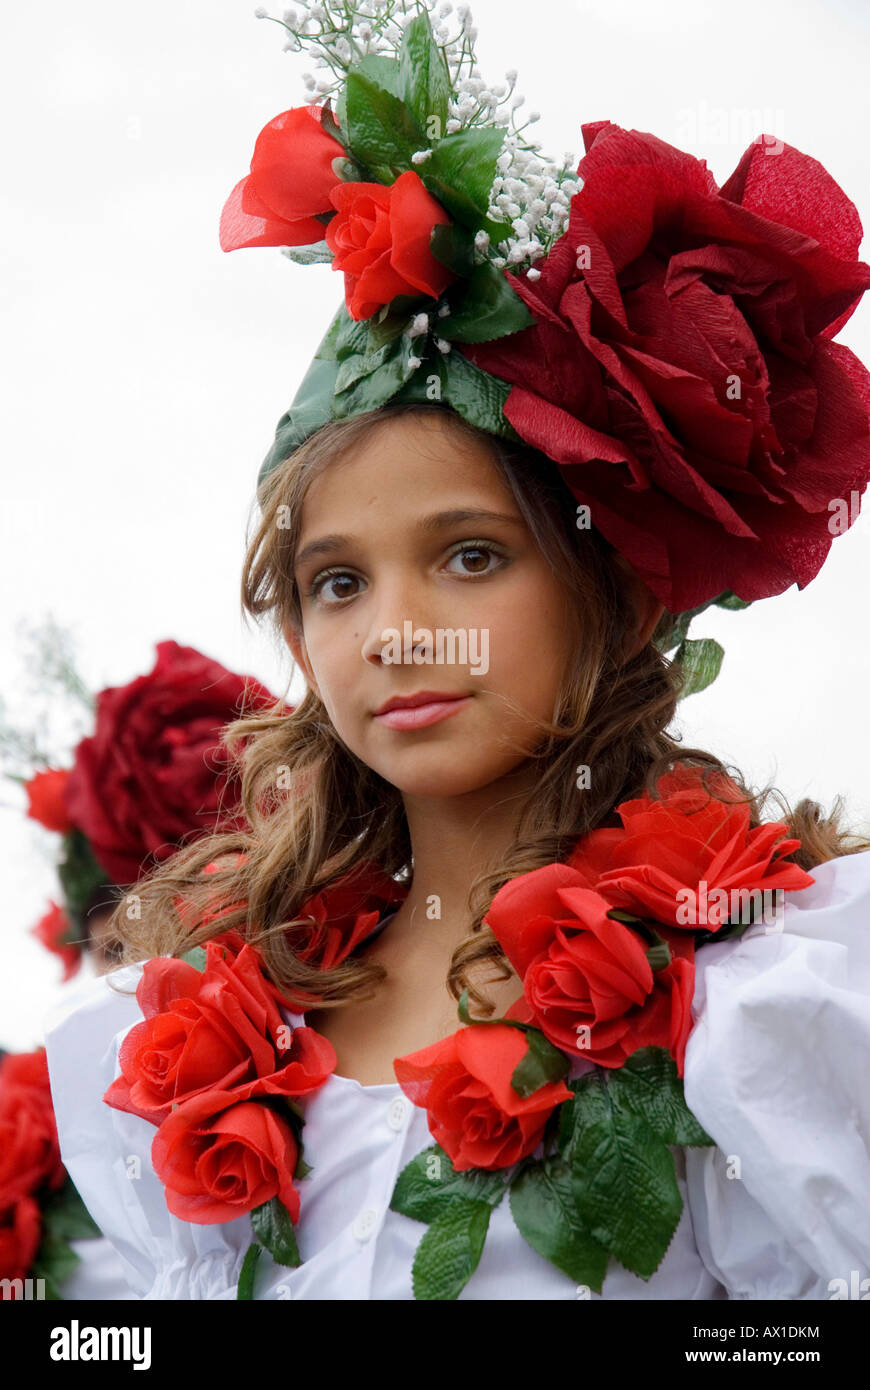 Large procession, April Flower Festival in Funchal, Madeira, Portugal, Europe Stock Photo